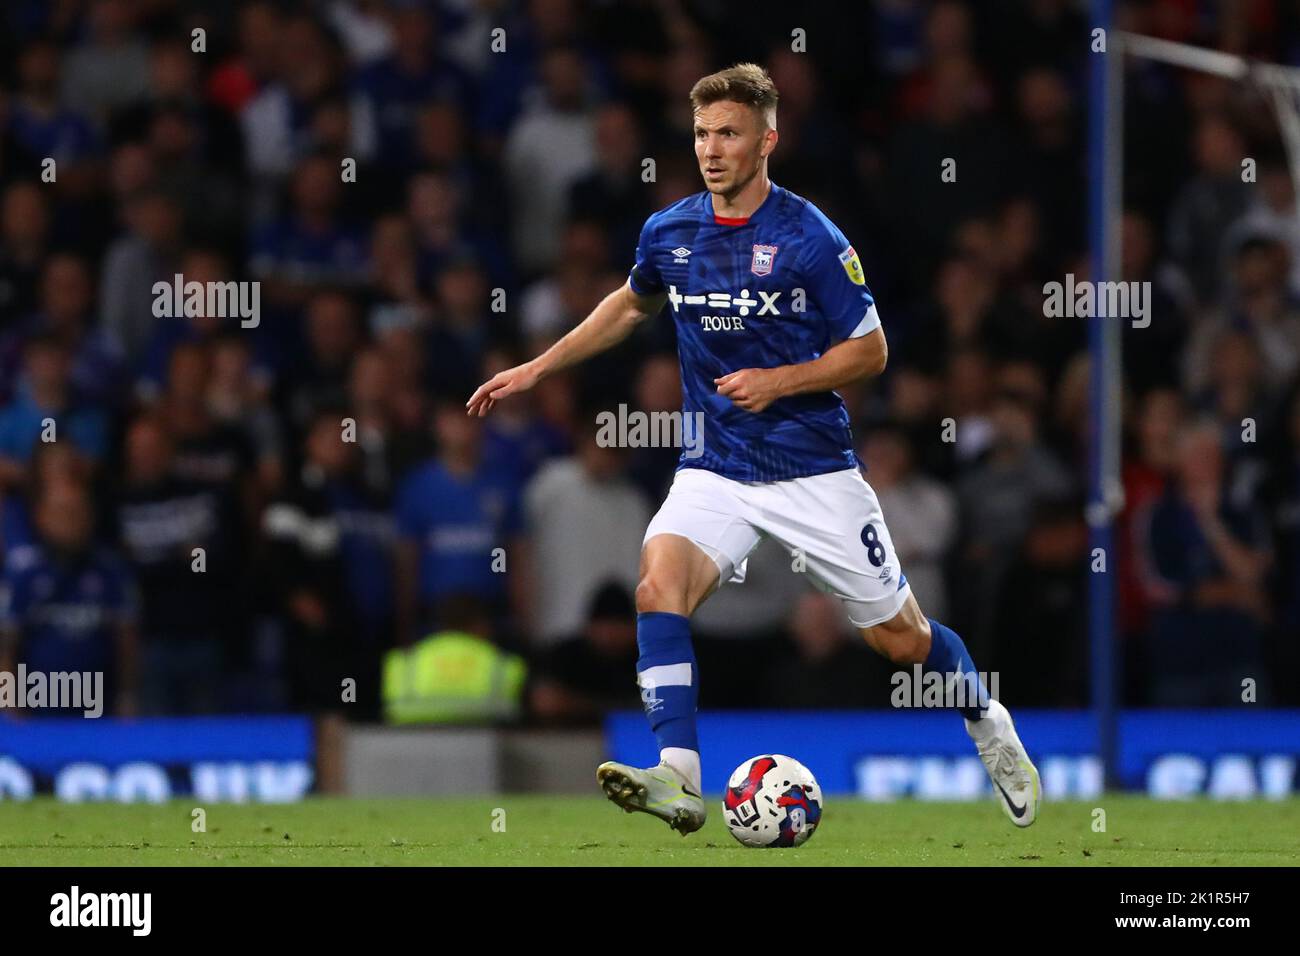 Lee Evans of Ipswich Town - Ipswich Town v Bristol Rovers, Sky Bet League One, Portman Road, Ipswich, UK - 13th September 2022  Editorial Use Only - DataCo restrictions apply Stock Photo